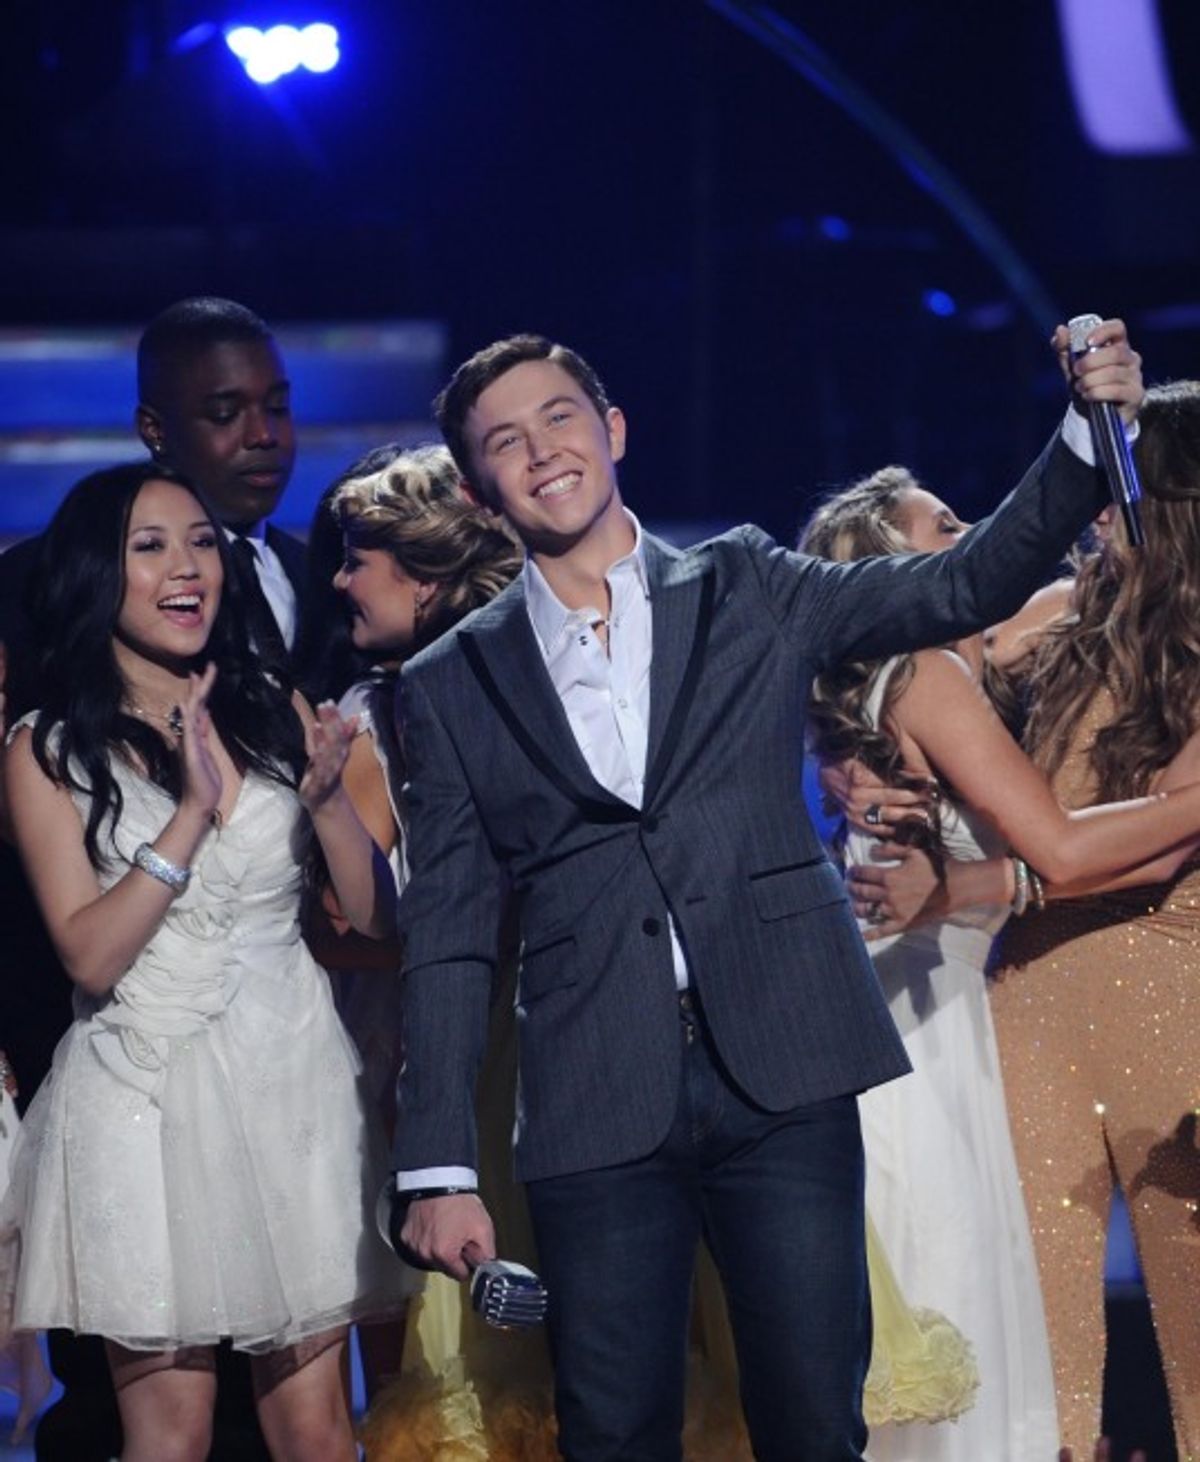 AMERICAN IDOL: Scotty McCreery learns that he is the next American Idol during the season ten AMERICAN IDOL GRAND FINALE at the Nokia Theatre on Weds. May 25, 2011 in Los Angeles, California.  CR: Michael Becker/FOX